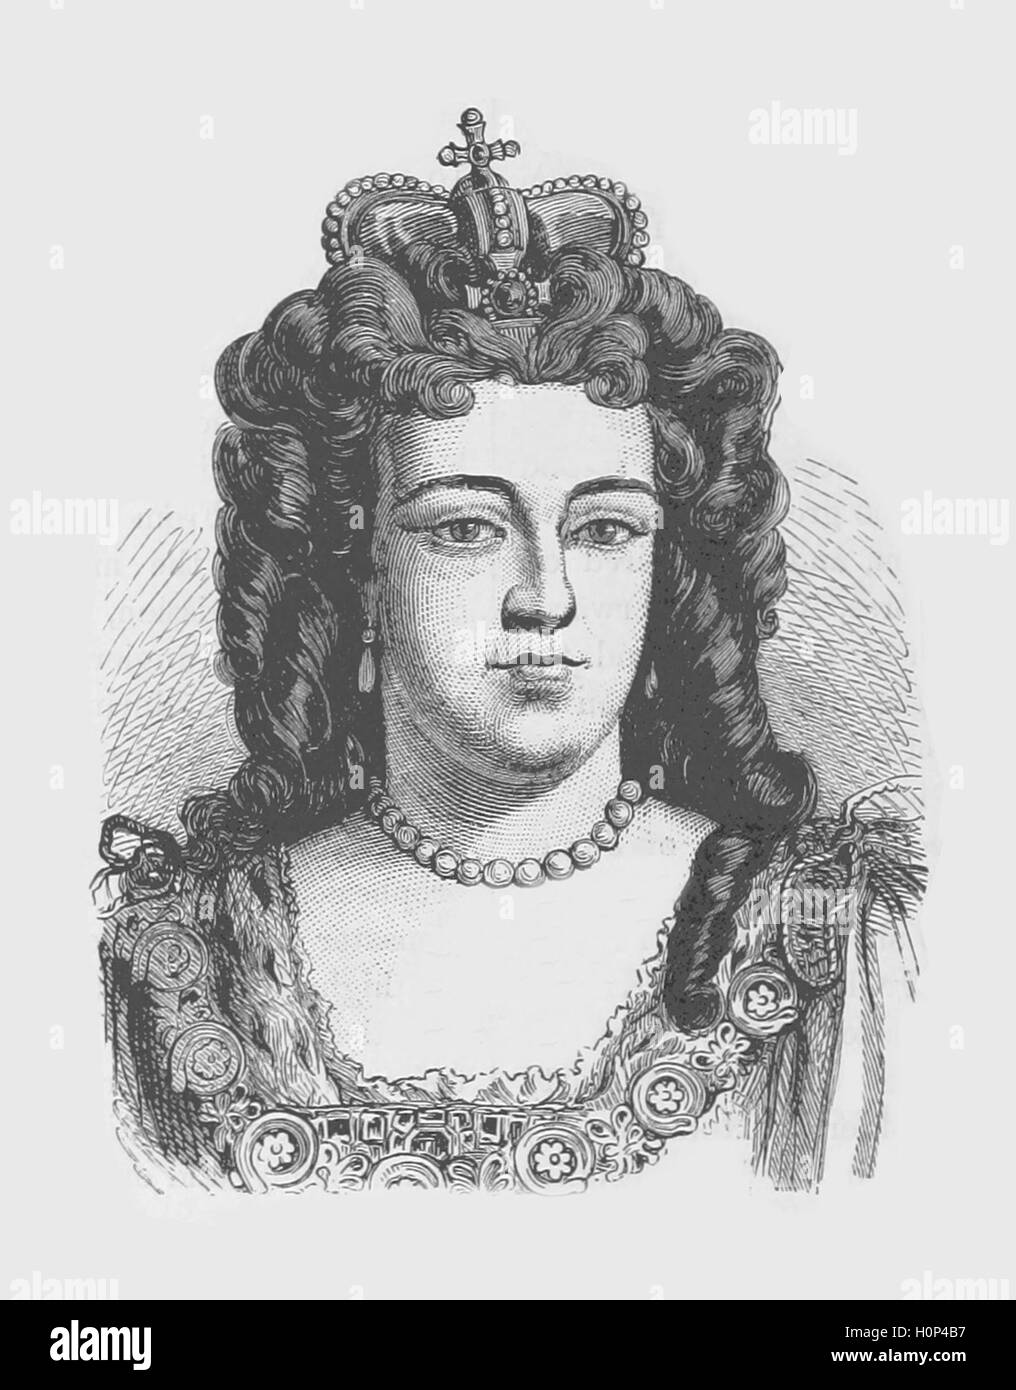 Queen Anne of England Scotland and Ireland.  Queen Anne became Queen of England, Scotland and Ireland on 8 March 1702. On 1 May 1707, under the Acts of Union, two of her realms, the kingdoms of England and Scotland, united as a single sovereign state known as Great Britain. She continued to reign as Queen of Great Britain and Ireland until her death.  Image sourced from Cassell's Illustrated Universal History (1893). Stock Photo